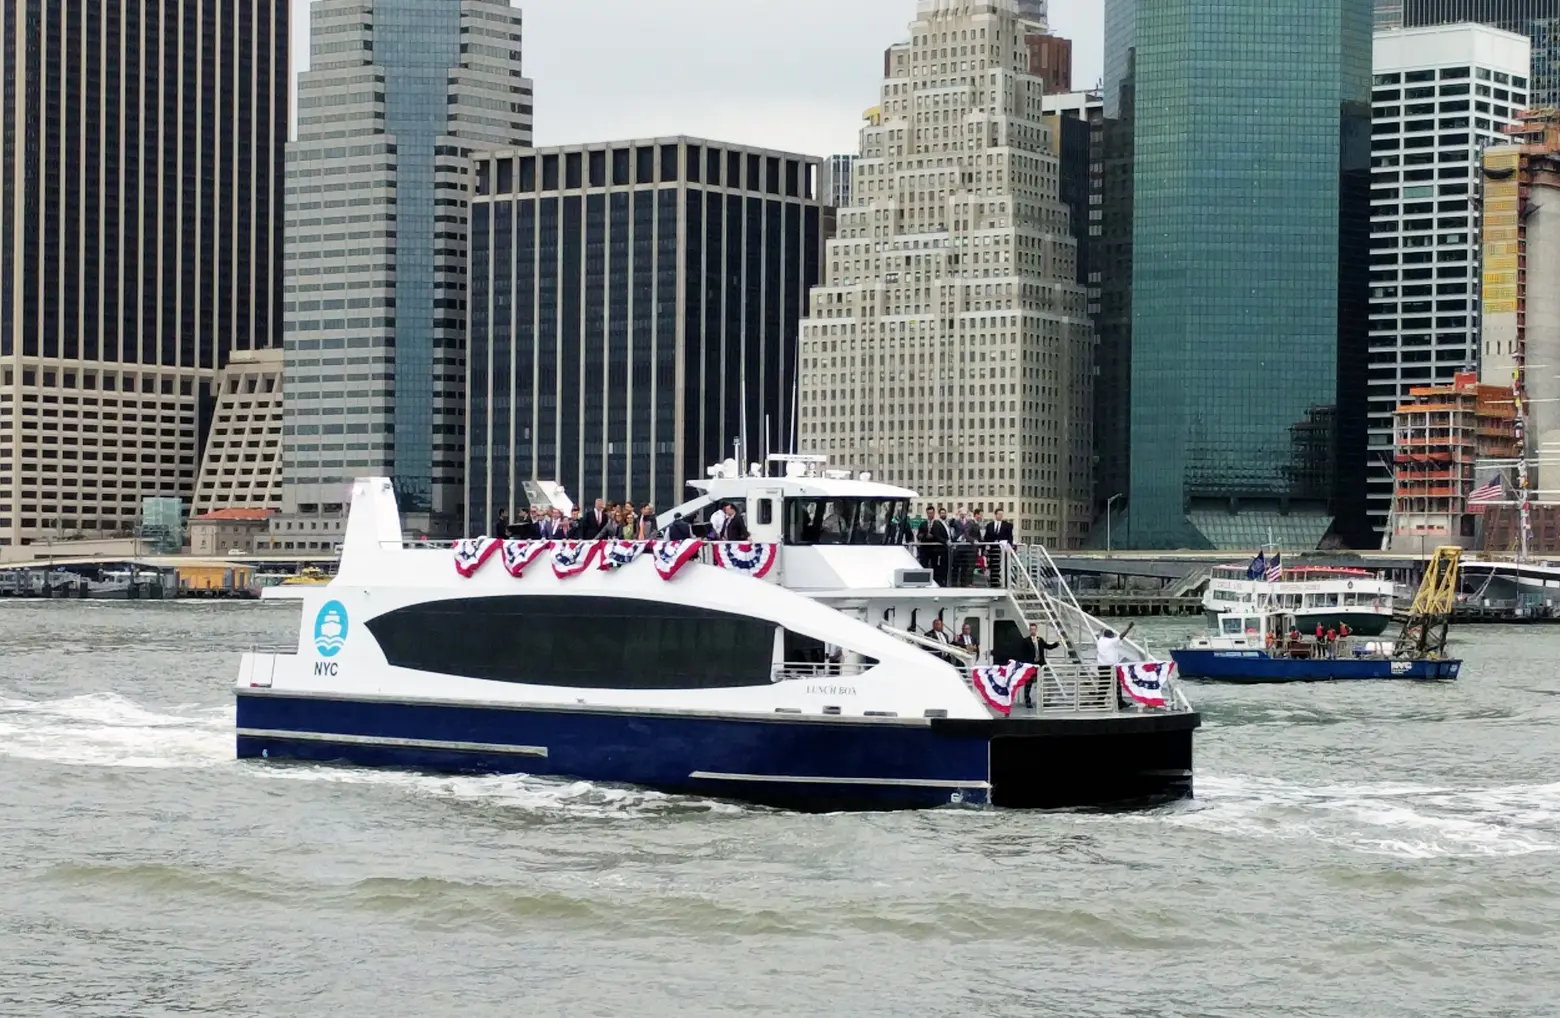 With delays and long lines, some New Yorkers are frustrated with new ferry service